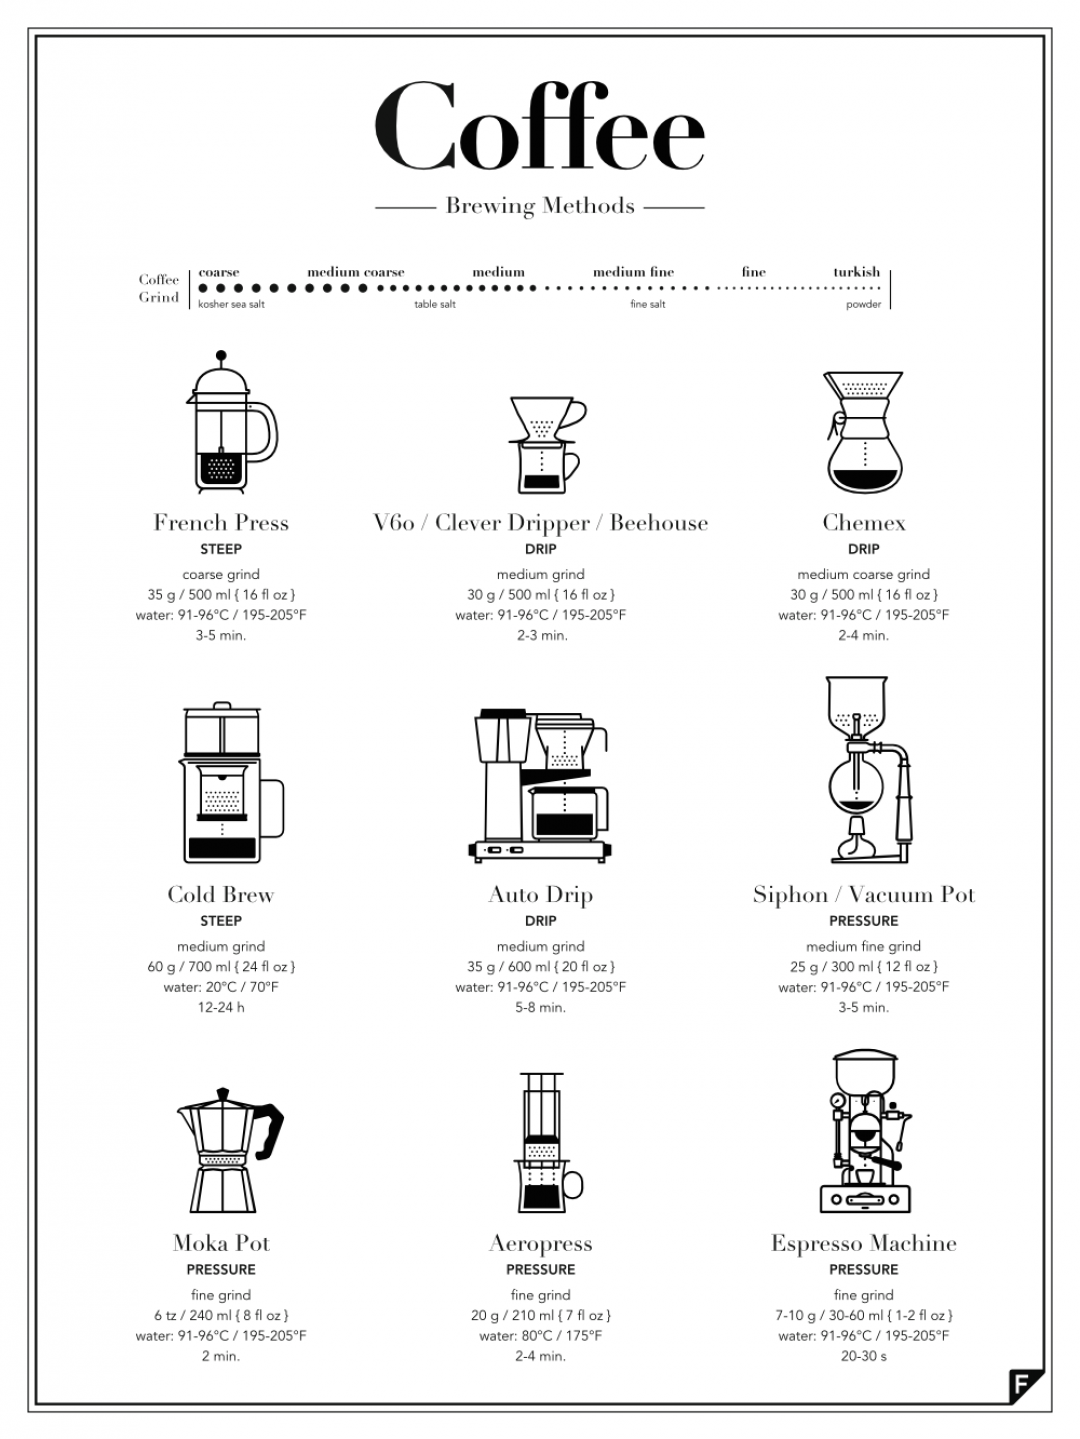 Here's an interesting graphic of different coffee making methods